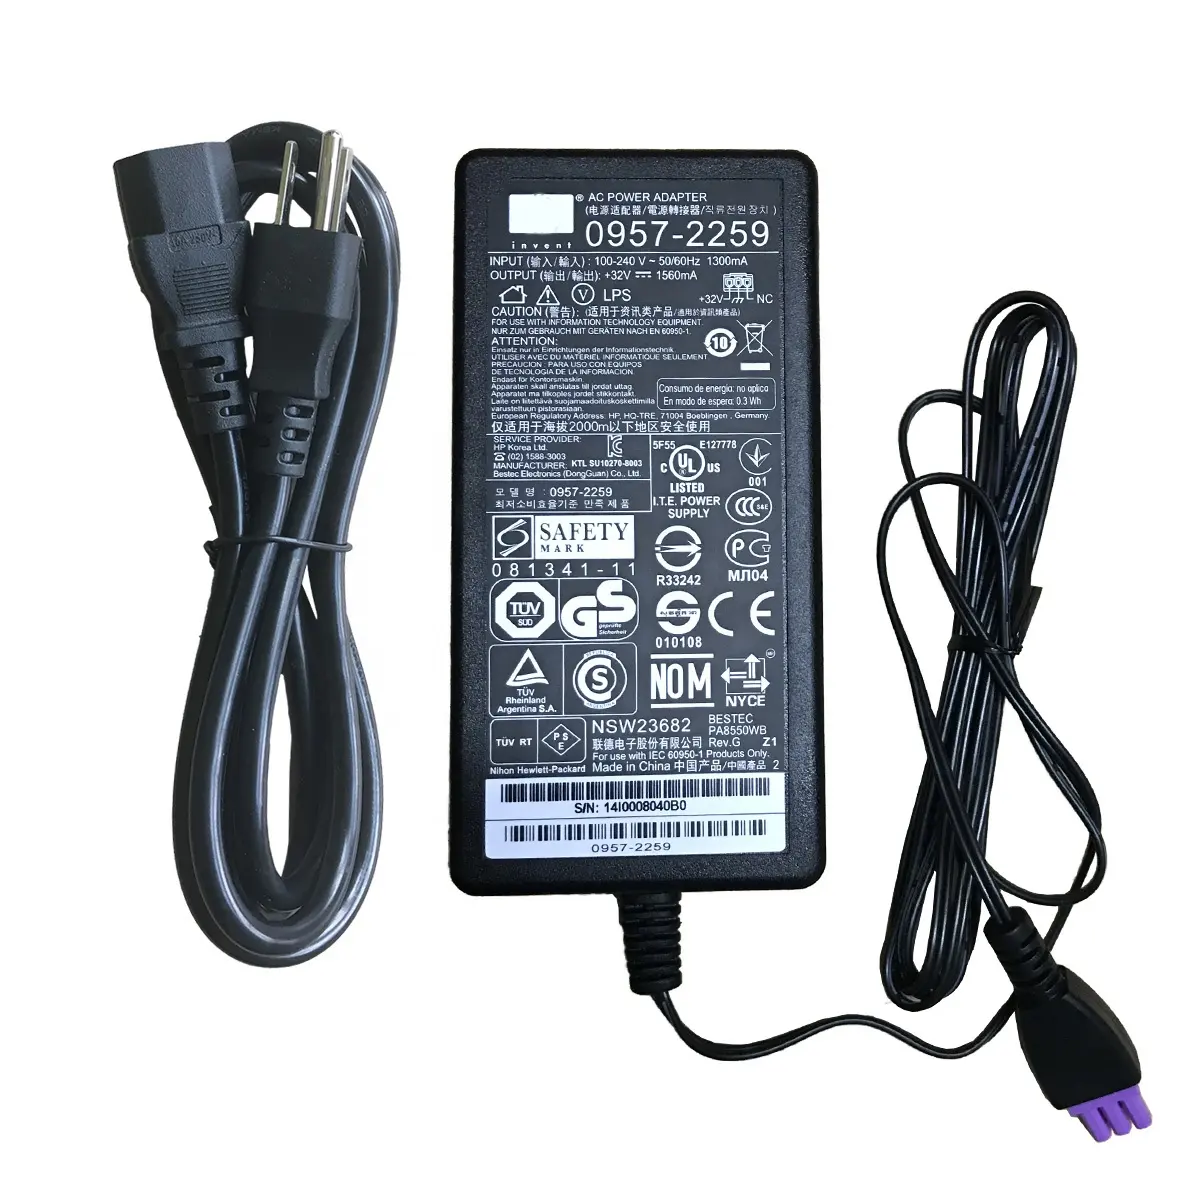 Printer 32V 1560mA AC Adapter 0957-2230 0957-2105 0957-2271ためHP Officejet 6000 4500 6500A 7500 7500A 6500 Plus E-All · イン · ONE